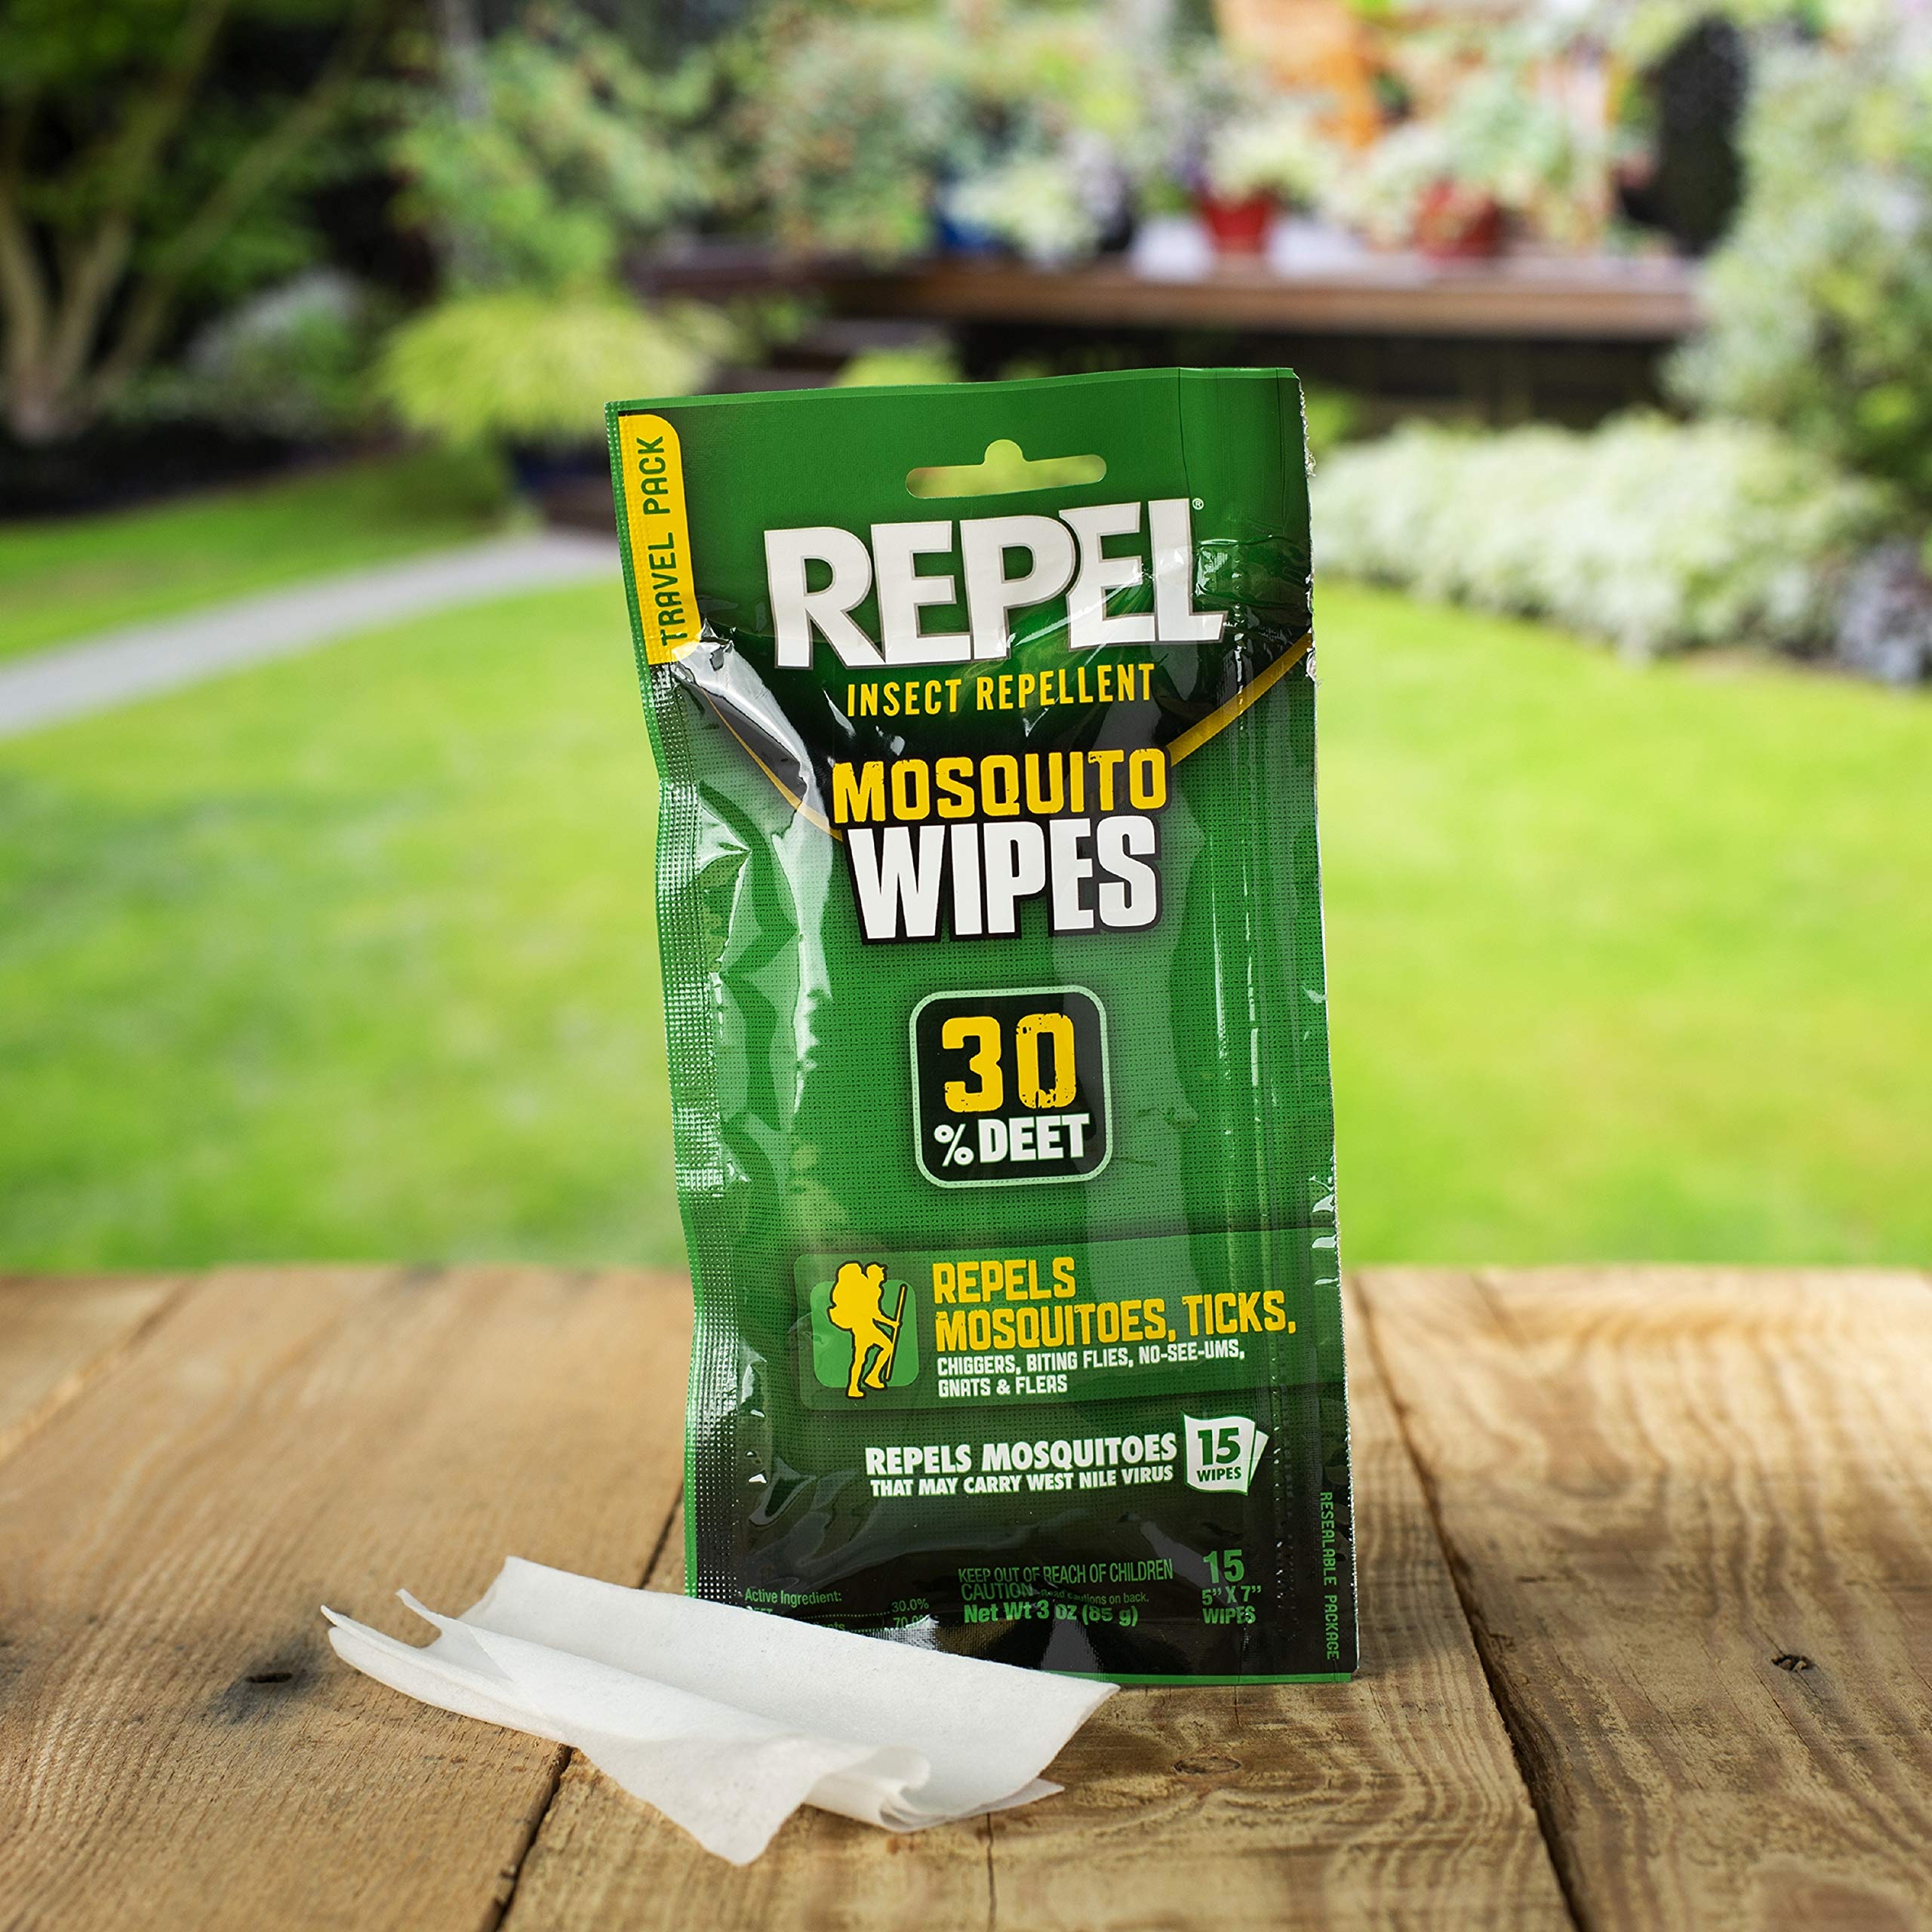 Repel Insect Repellent Mosquito Wipes with 30% DEET - 15 Count Travel Pack, Peppermint & Citronella Scented